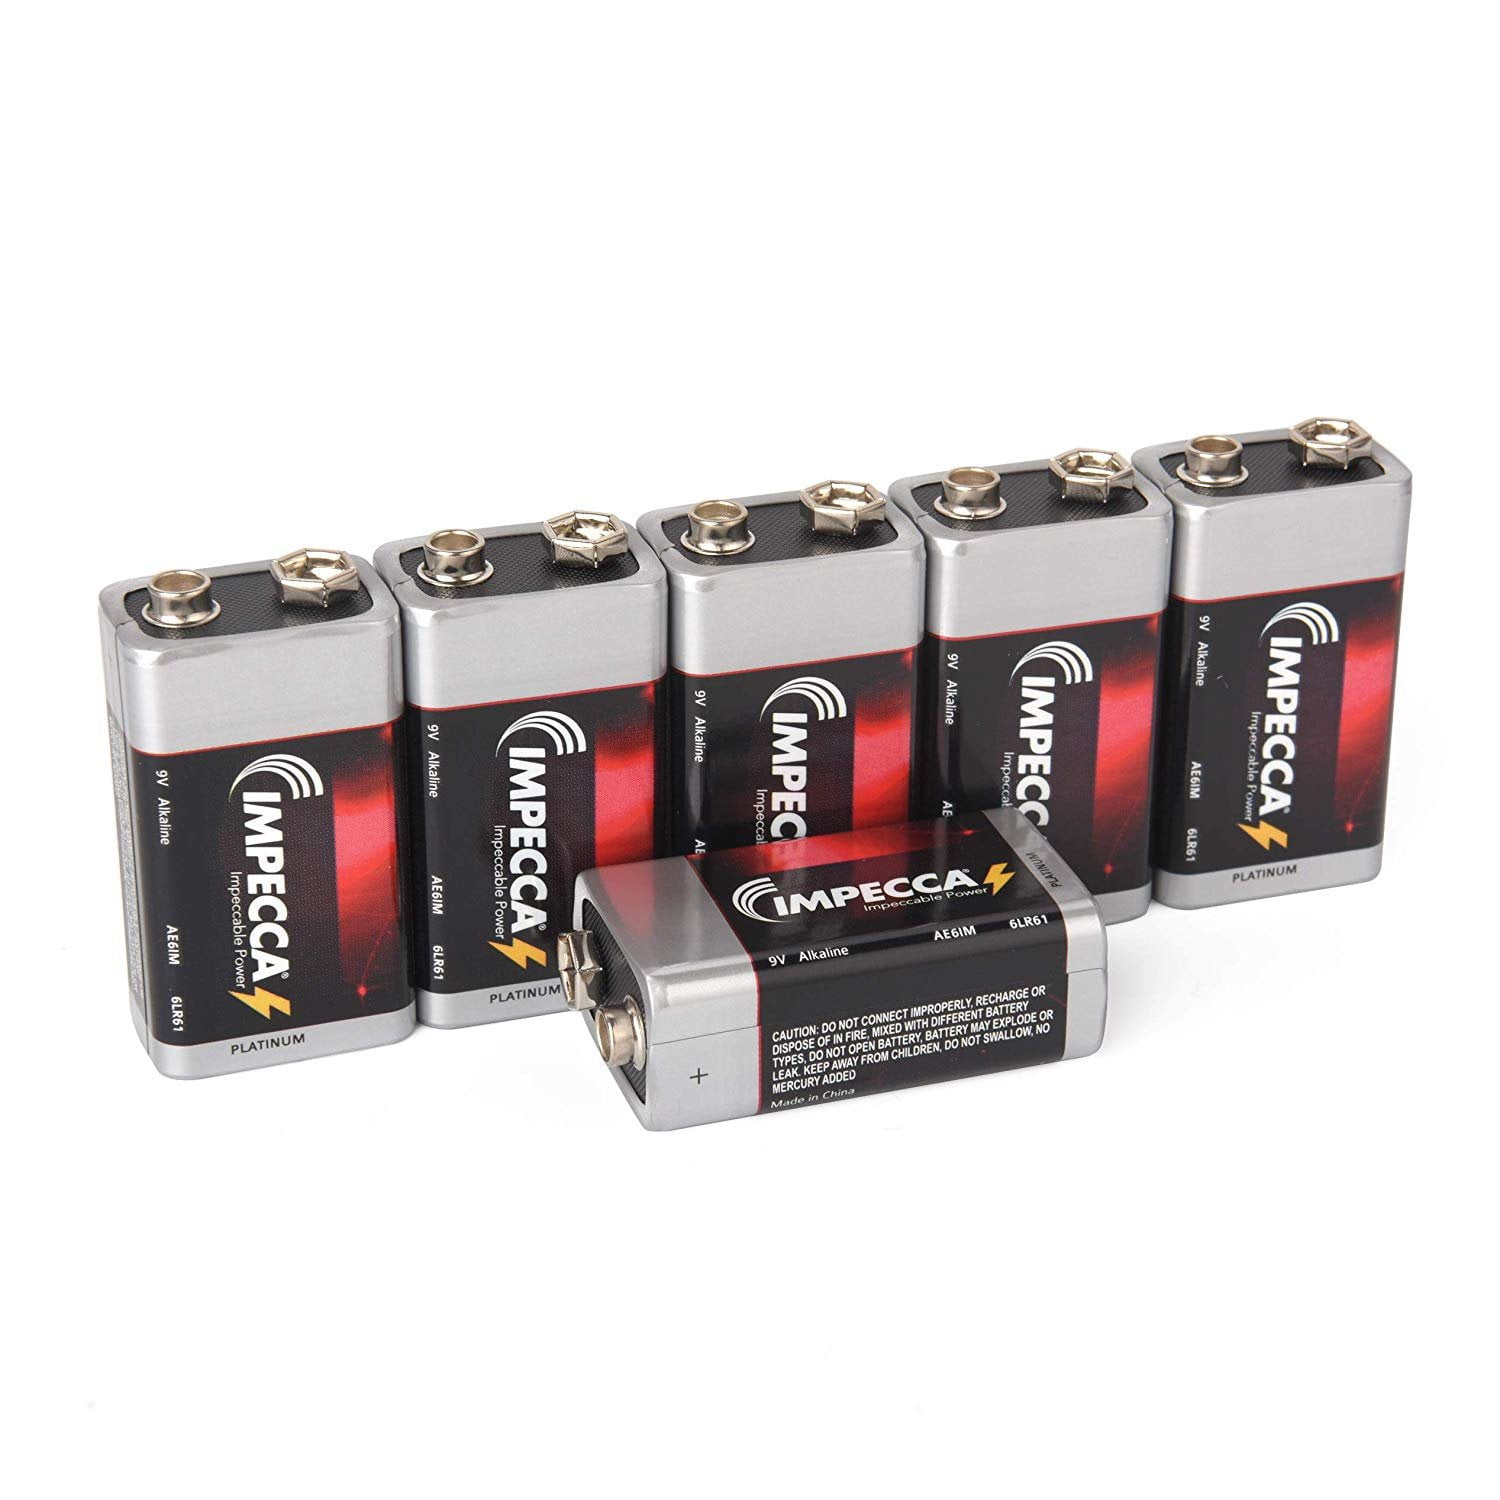 4 Pack IMPECCA AAA Batteries High Performance Triple A Alkaline Battery 1.5 Volt LR3 Non Rechargeable for Everyday Clocks Remotes Games Controllers Toys & Electronics 